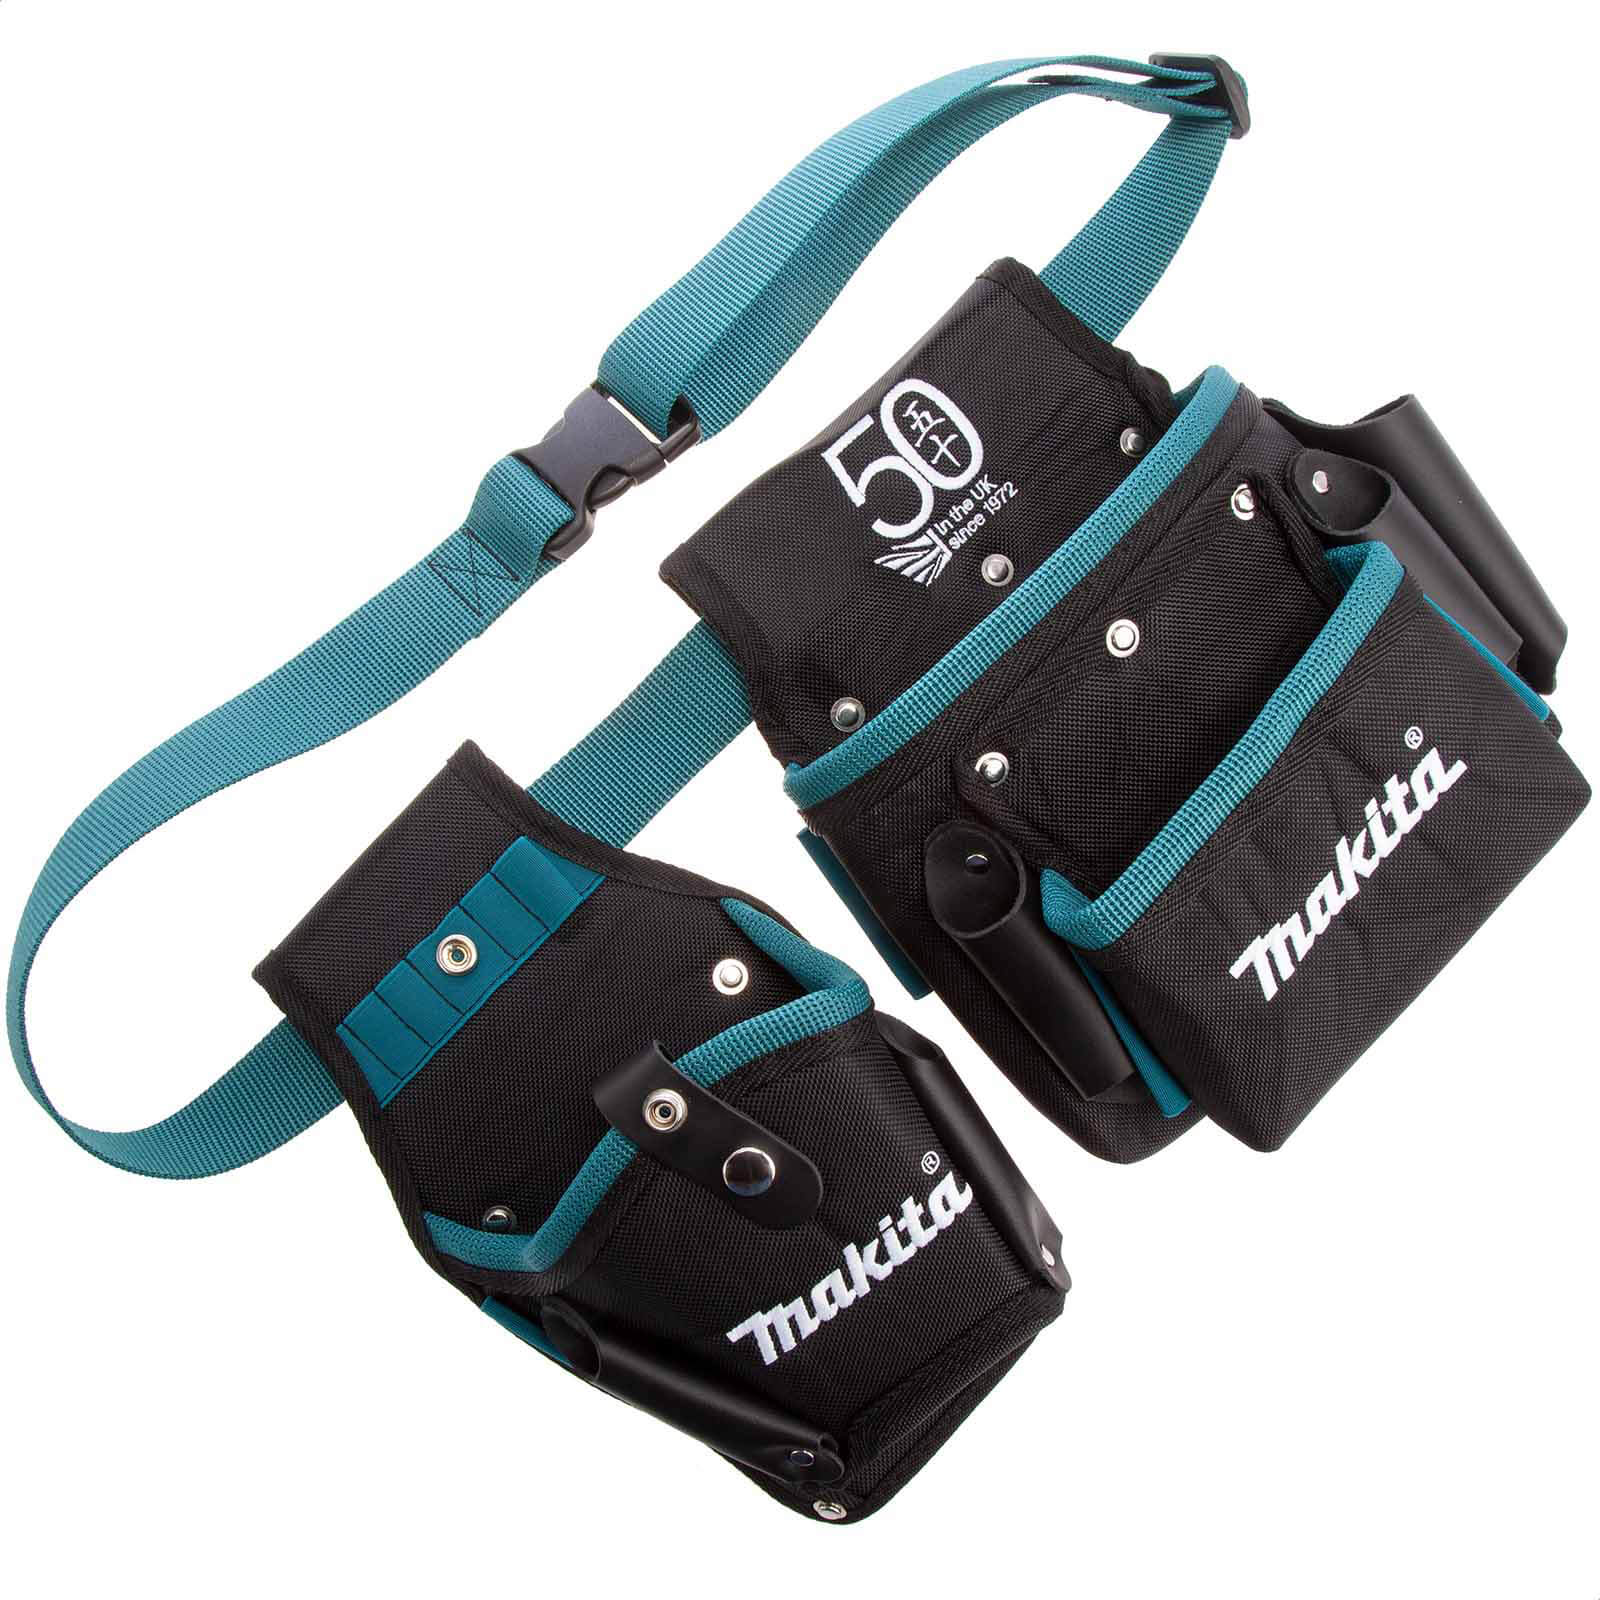 Makita Limited Edition 2 Pouch Tool Belt Set